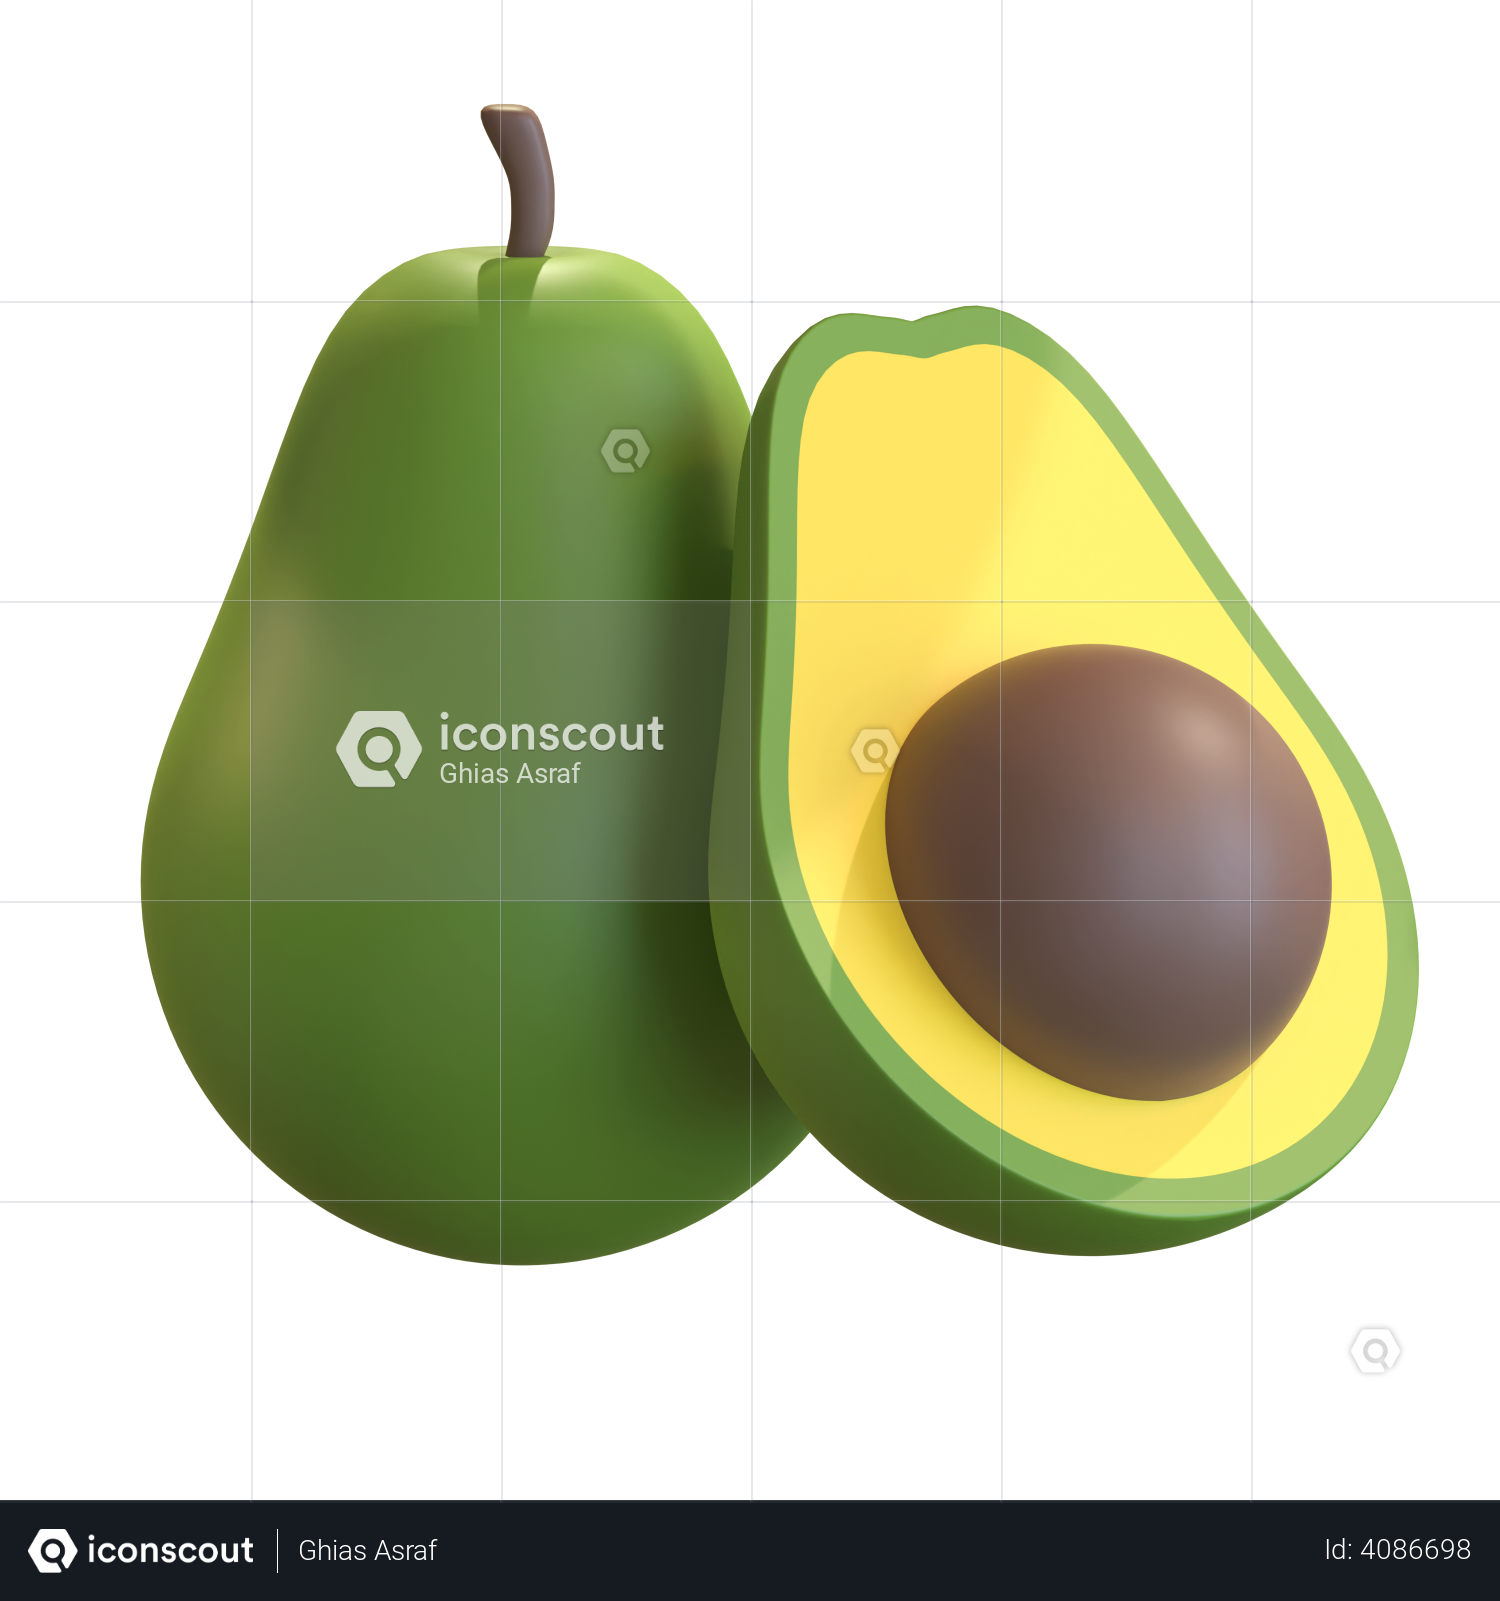 How to Draw a Avocado in Adobe Illustrator  YouTube